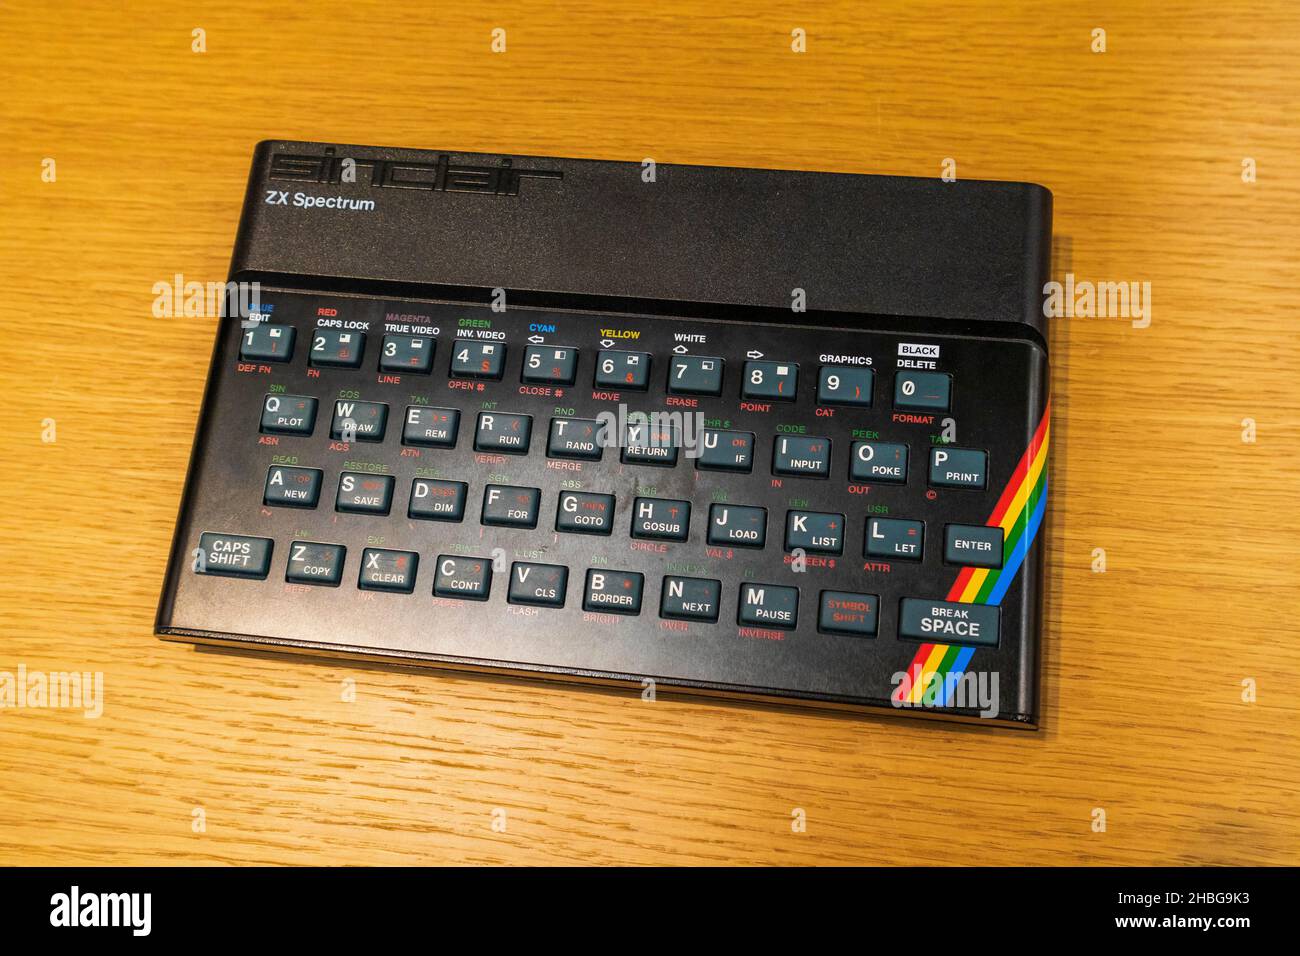 zx spectrum 8-bit personal home computer colour display retro.Russia,Moscow, 19okt2021. Stock Photo